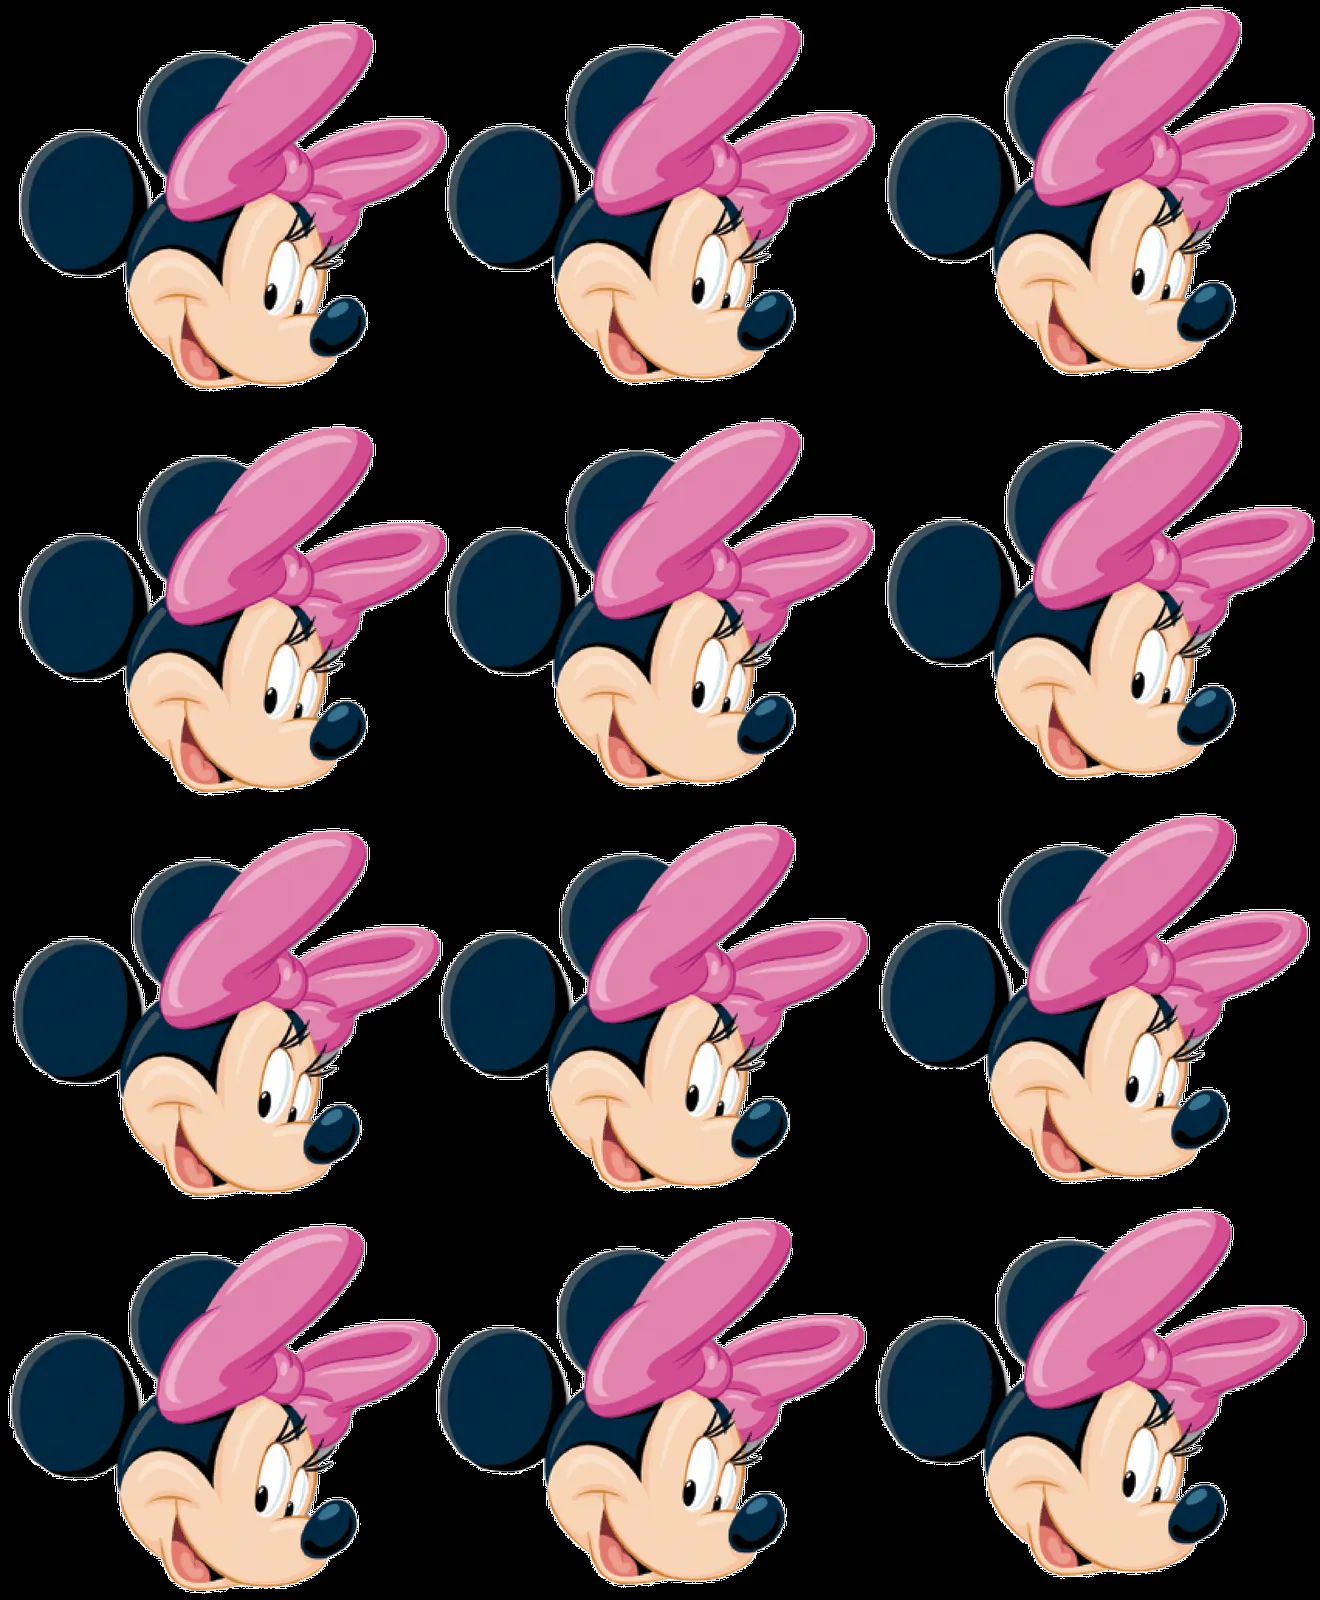 Marco Minnie Mouse Bebe Wallpapers | Real Madrid Wallpapers